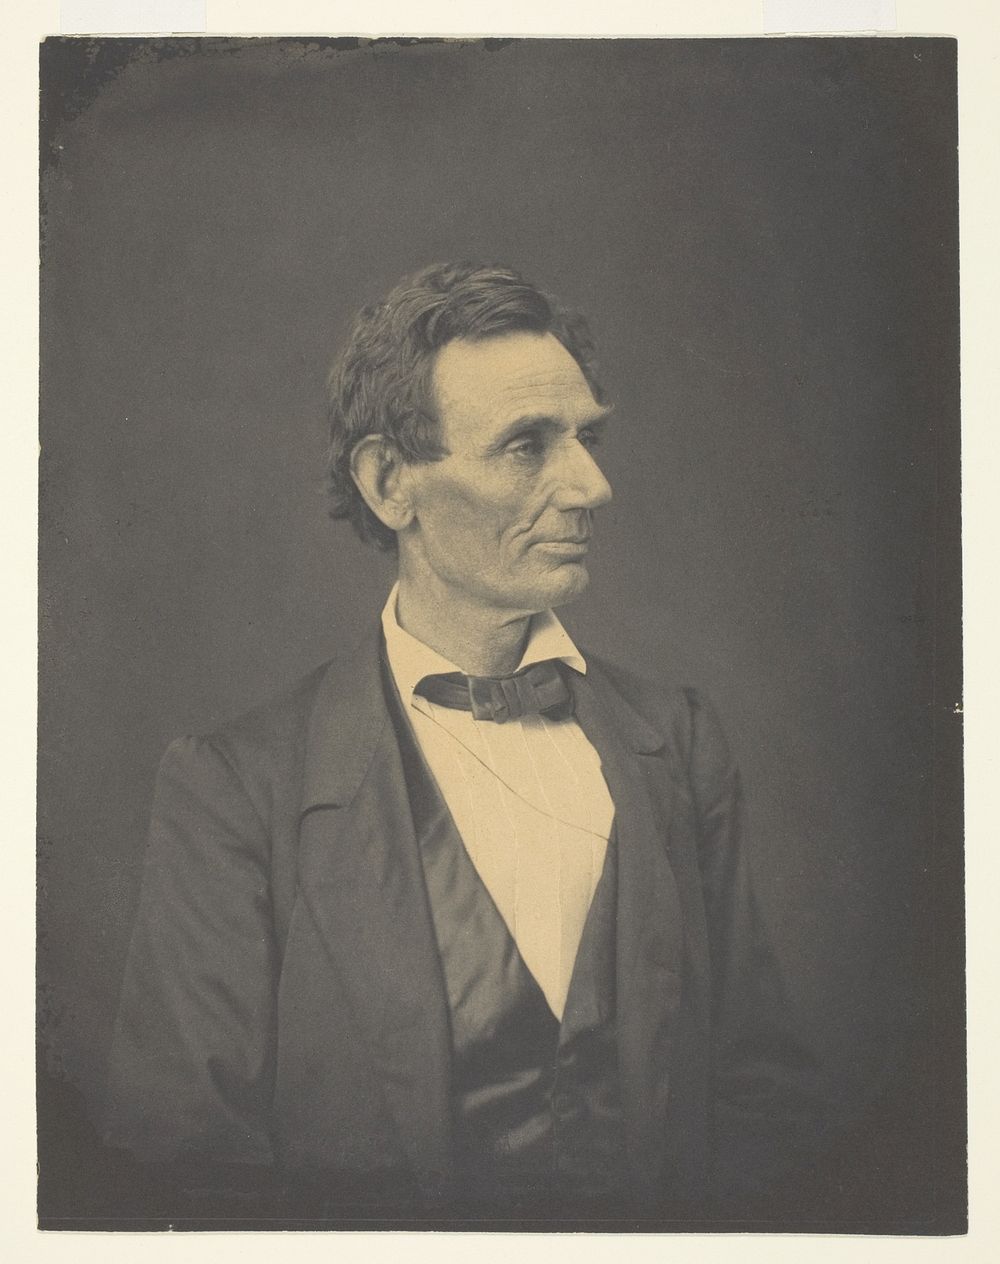 Abraham Lincoln, Springfield, Illinois by Alexander Hesler